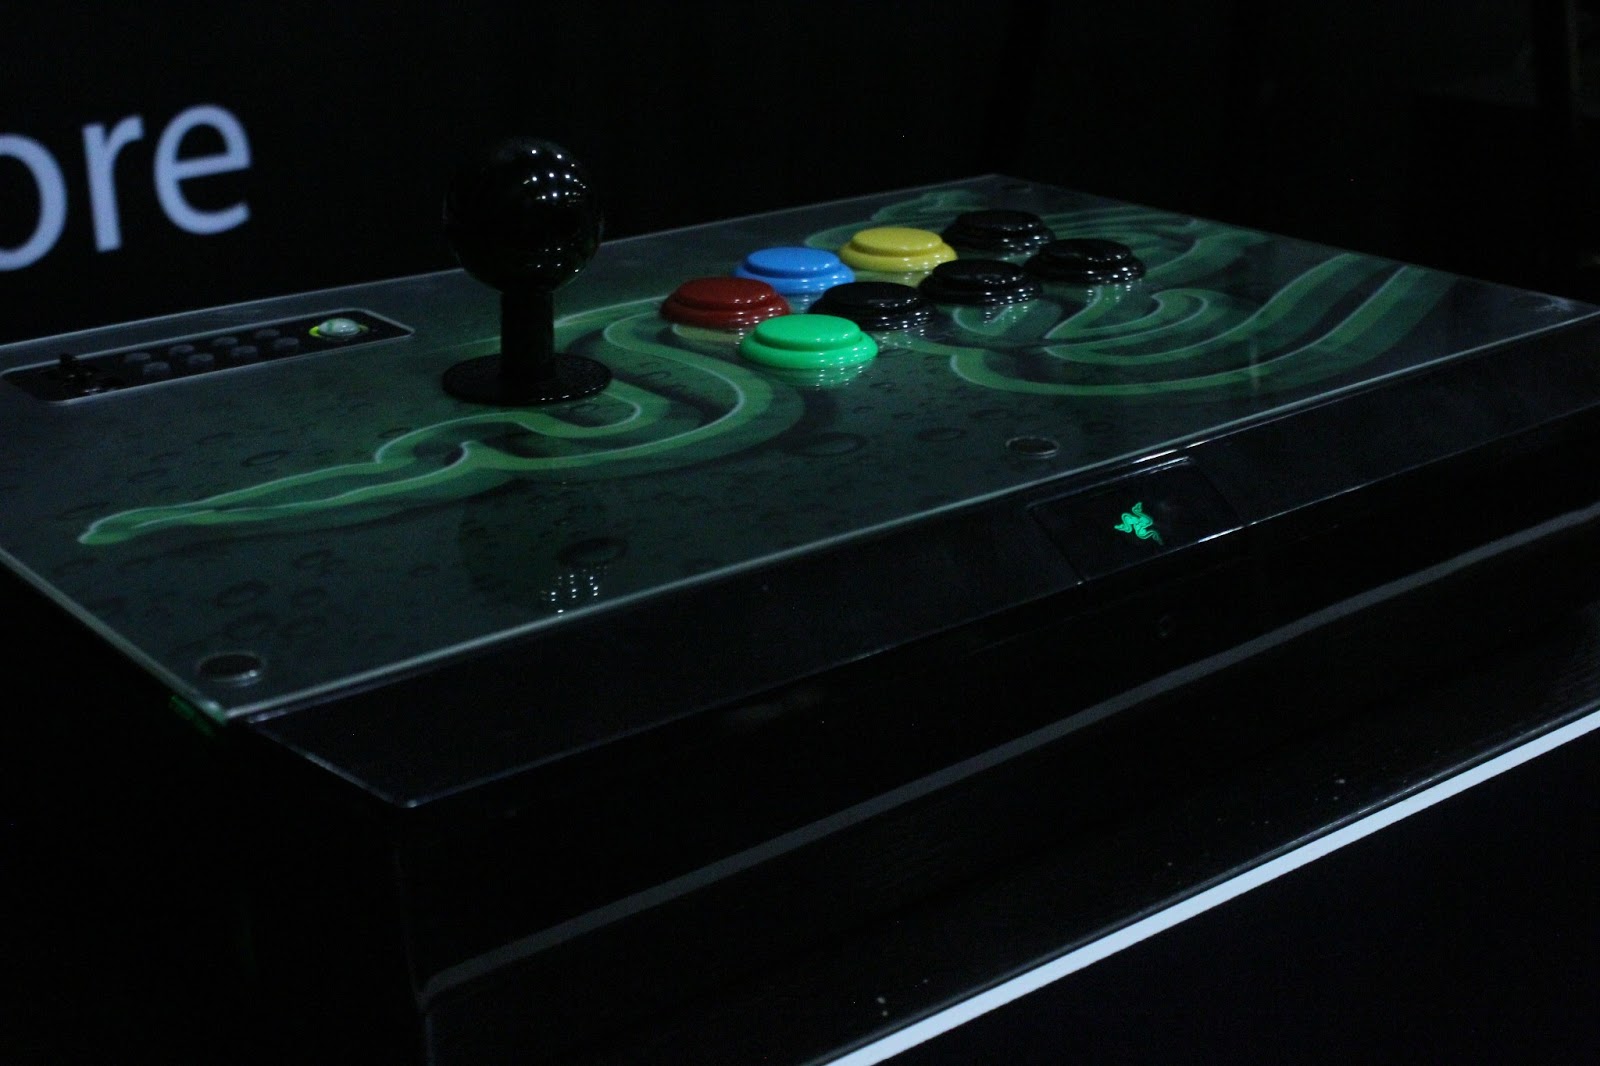 Preview: Hands On With The Razer Atrox Arcade Stick - We Know Gamers ...